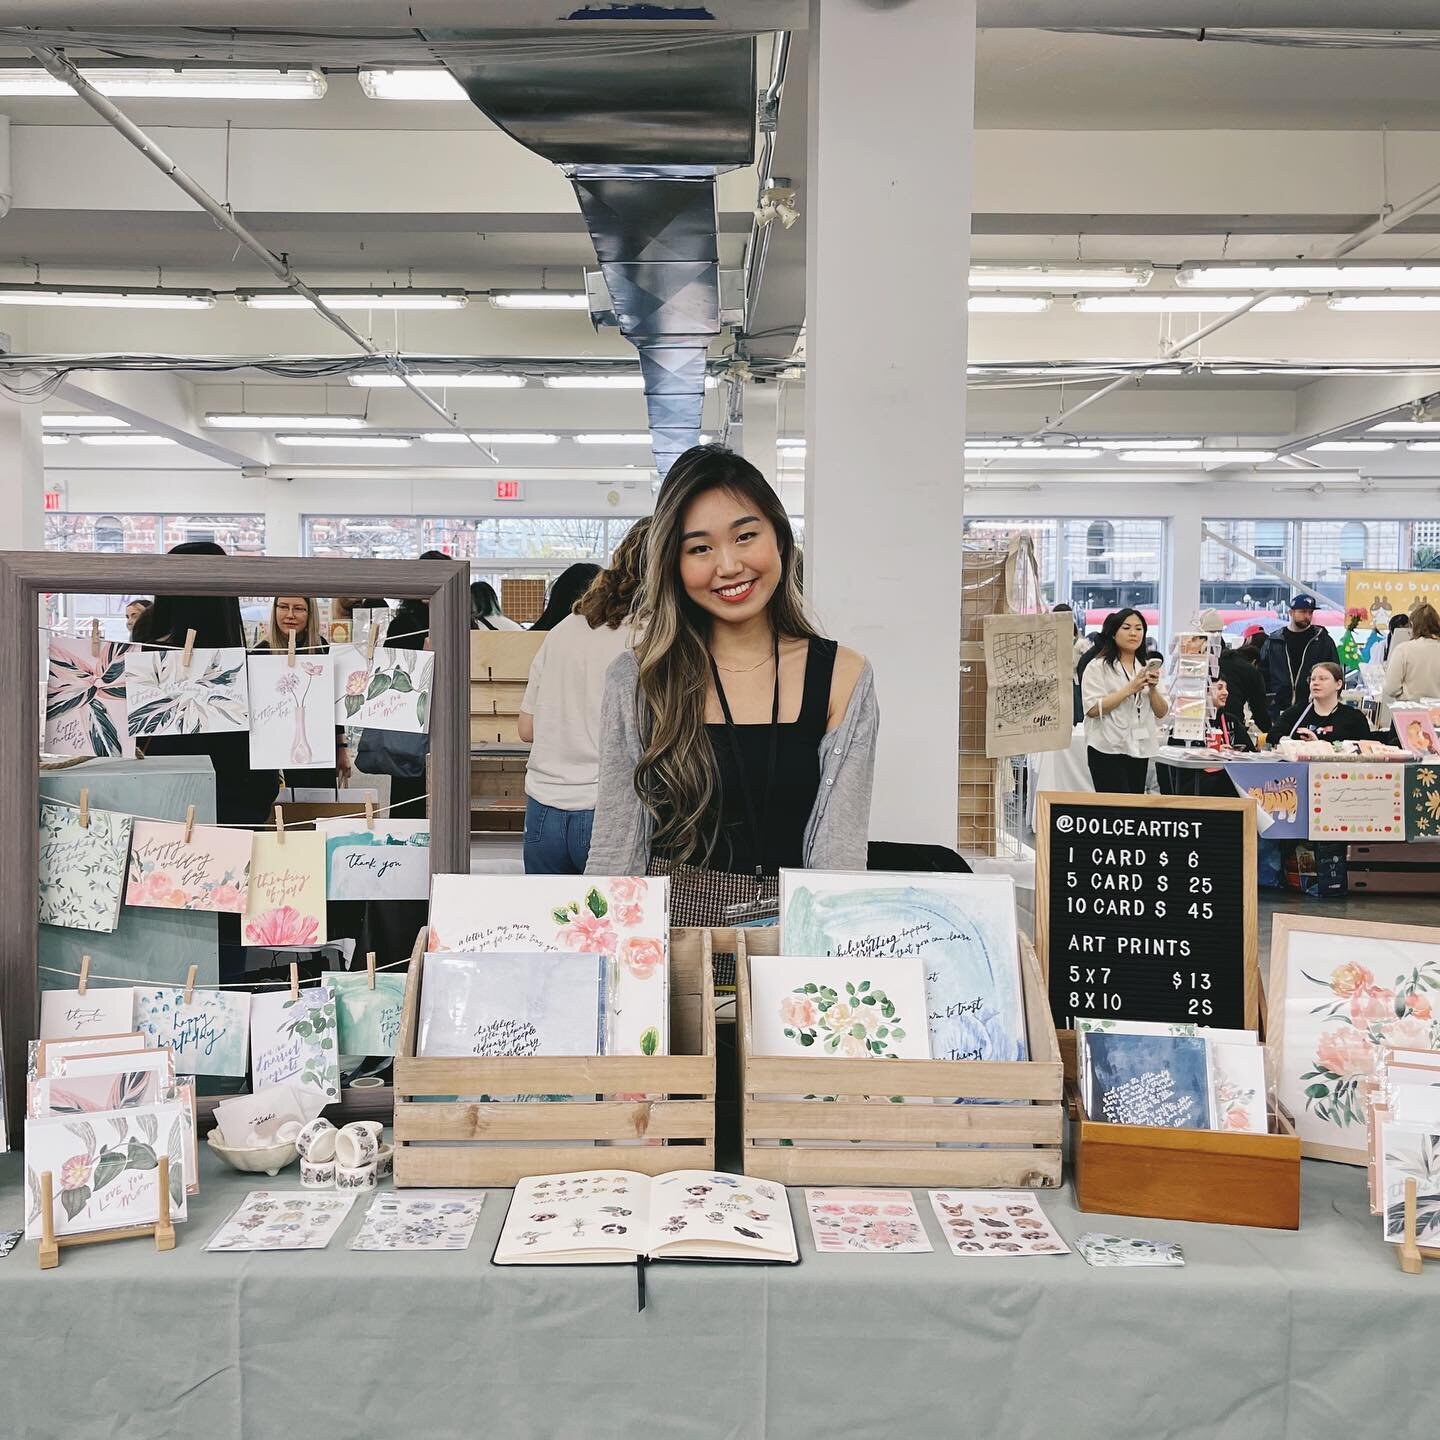 Thank you to everyone who waited in the rain to support the @torontostationeryshow on Sunday - every vendor I spoke with said it was a huge success and they would love to be part of it again! The biggest thank you goes to @queeniescards @dreyray and 